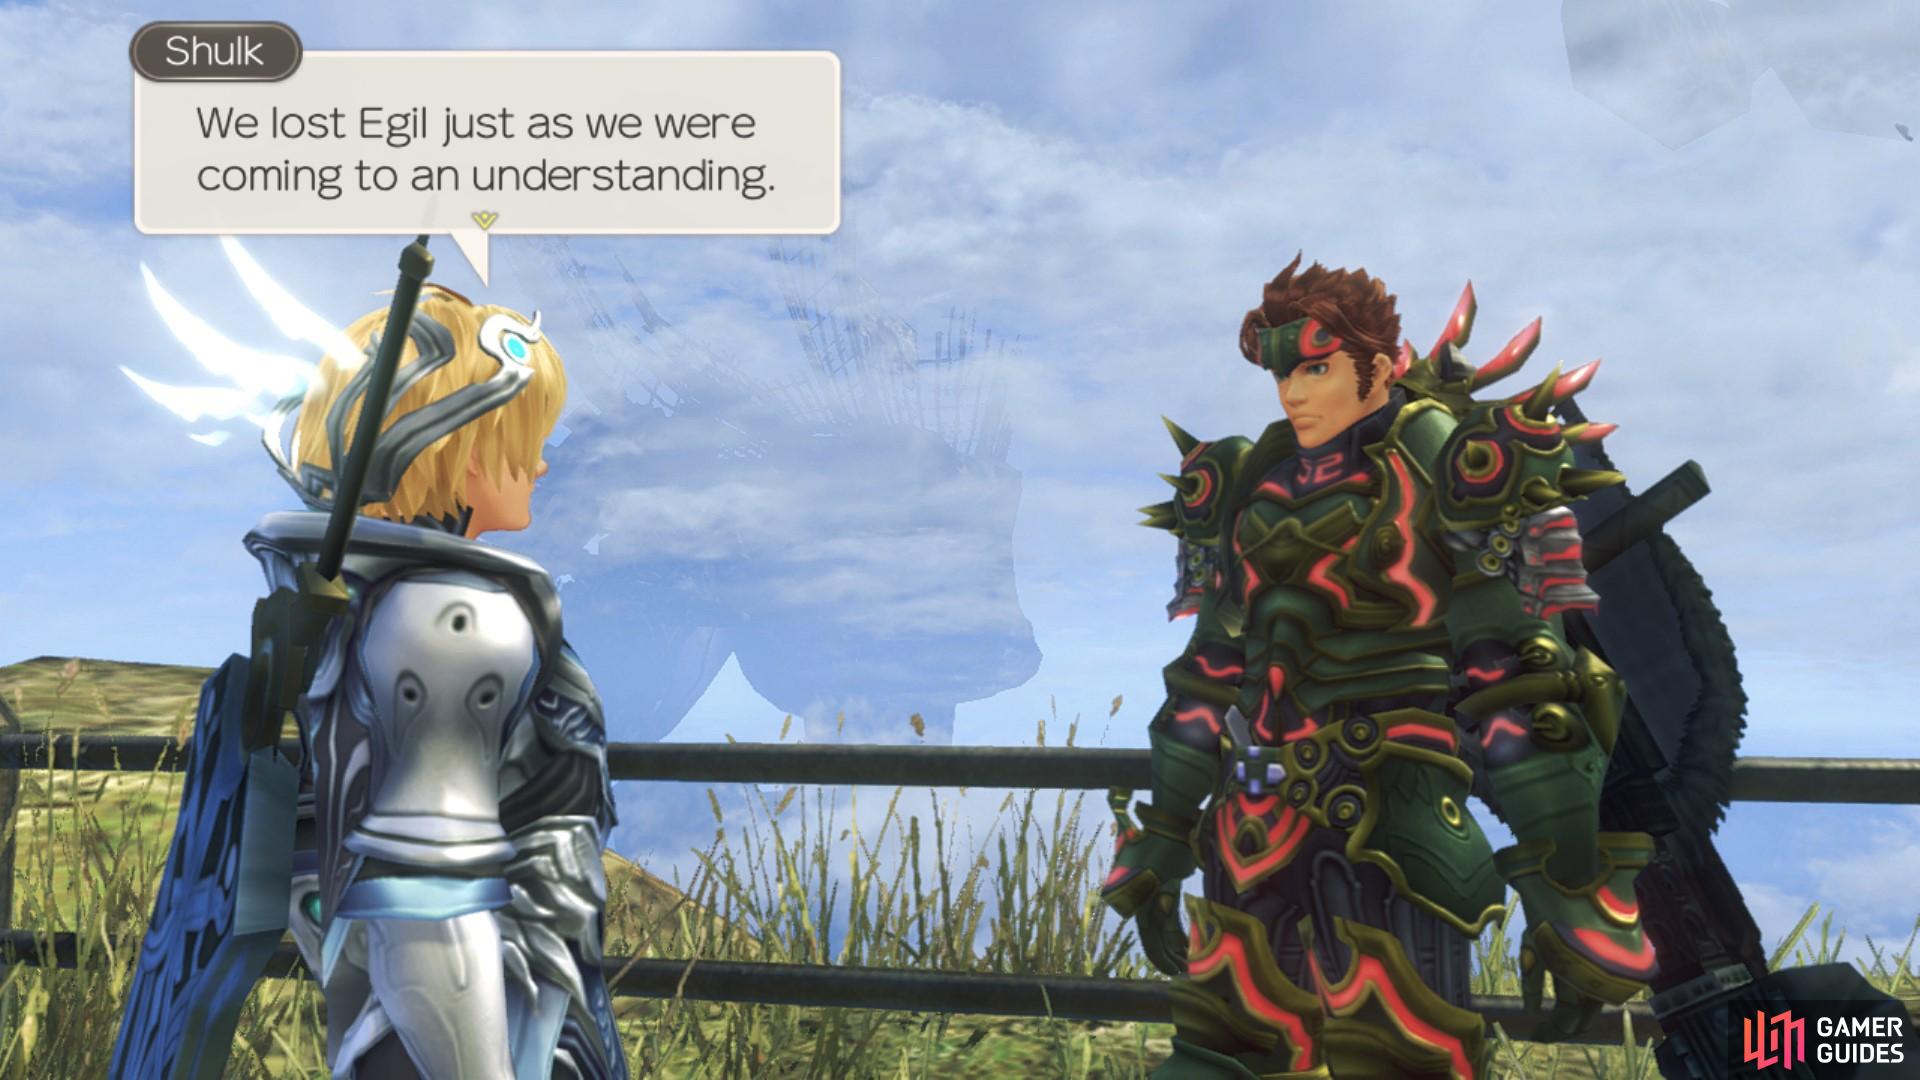 Reyn and Shulk are determined to bring peace to the Bionis once more.